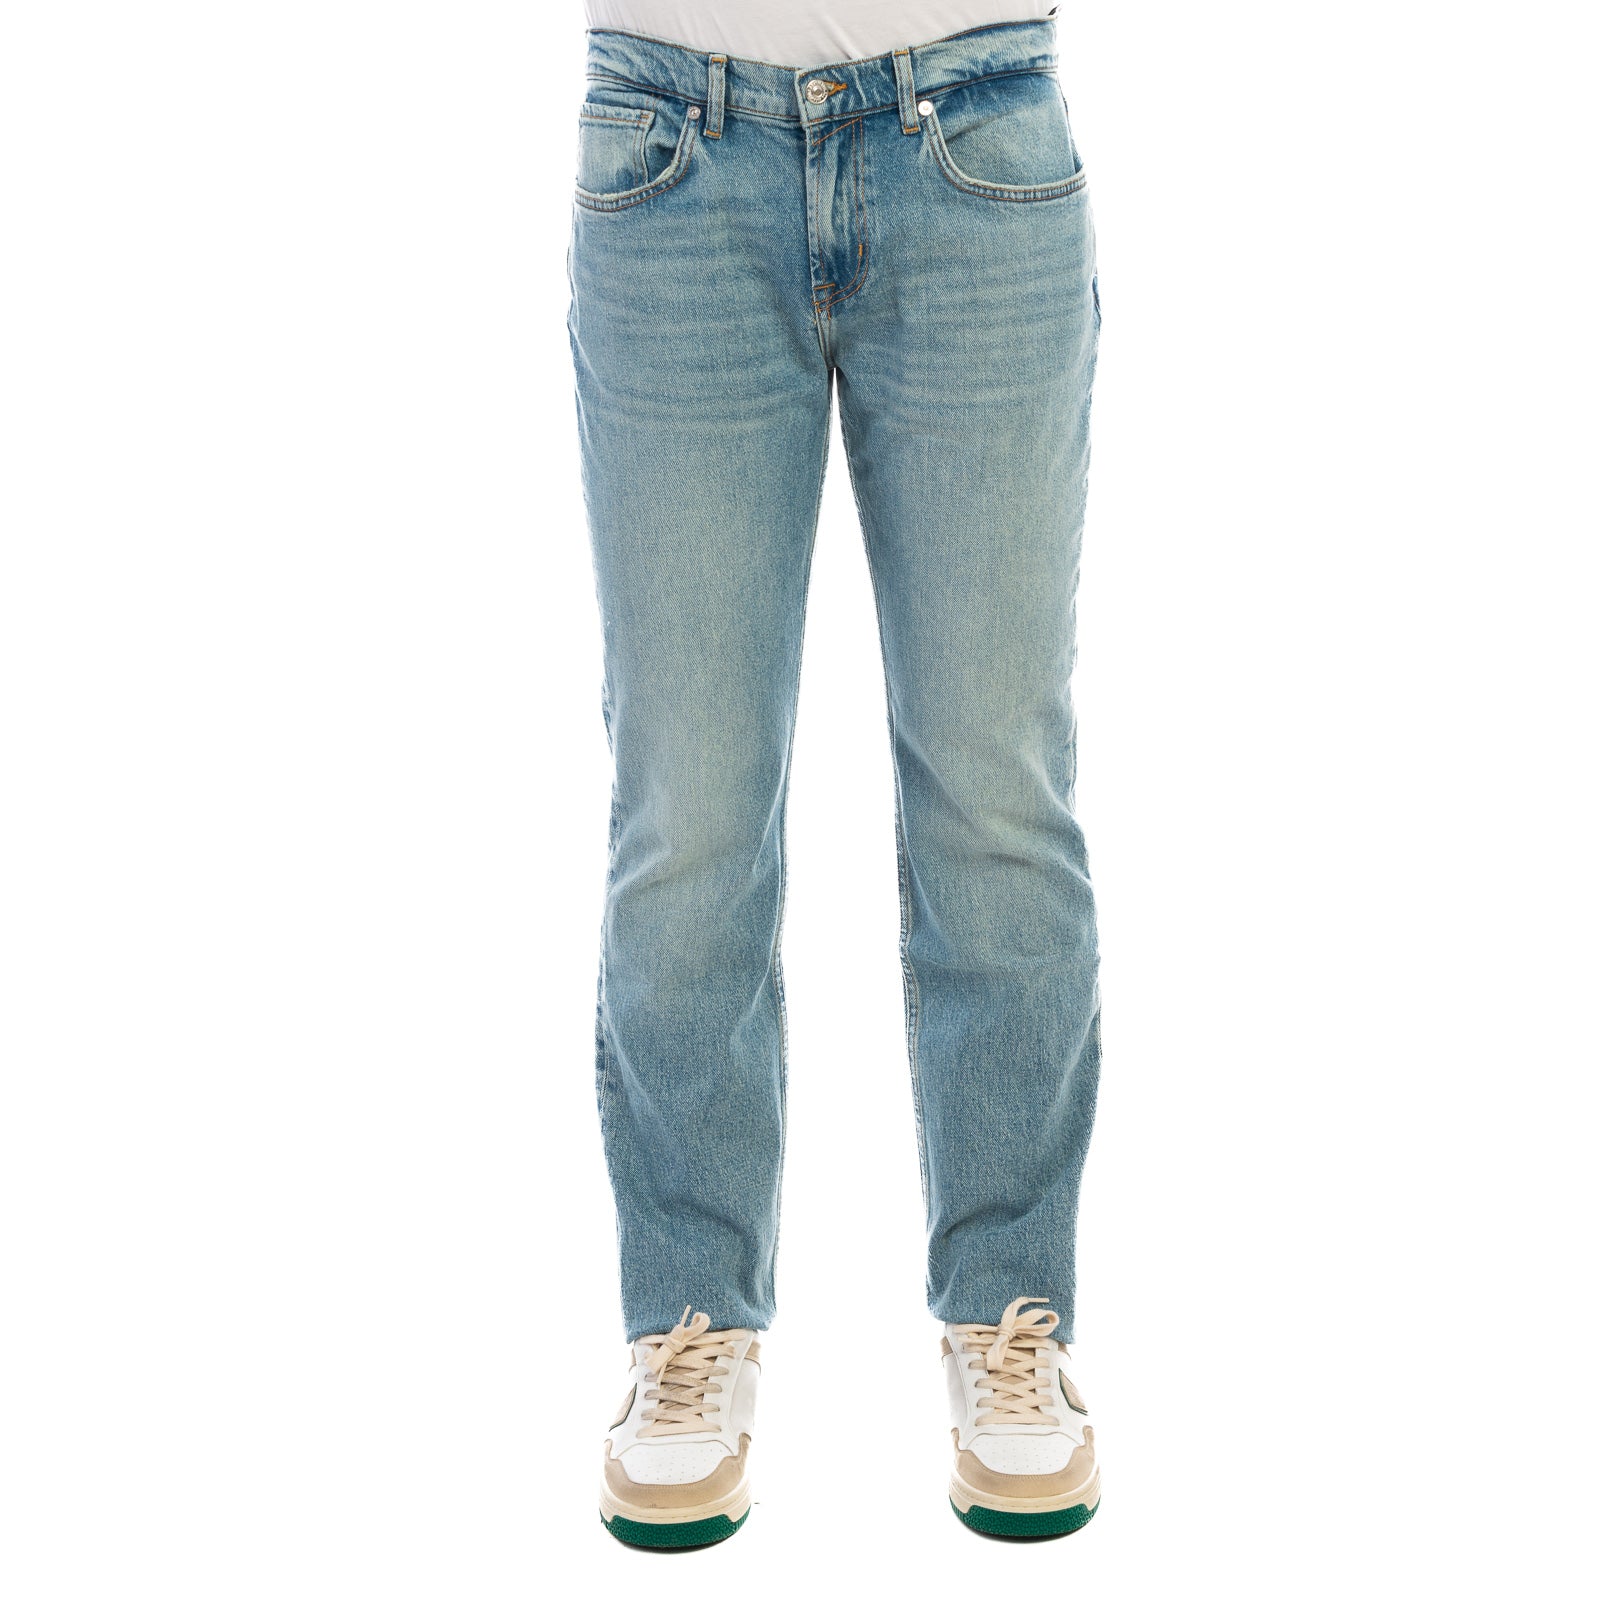 Jeans 7 FOR ALL MANKIND
Light blue